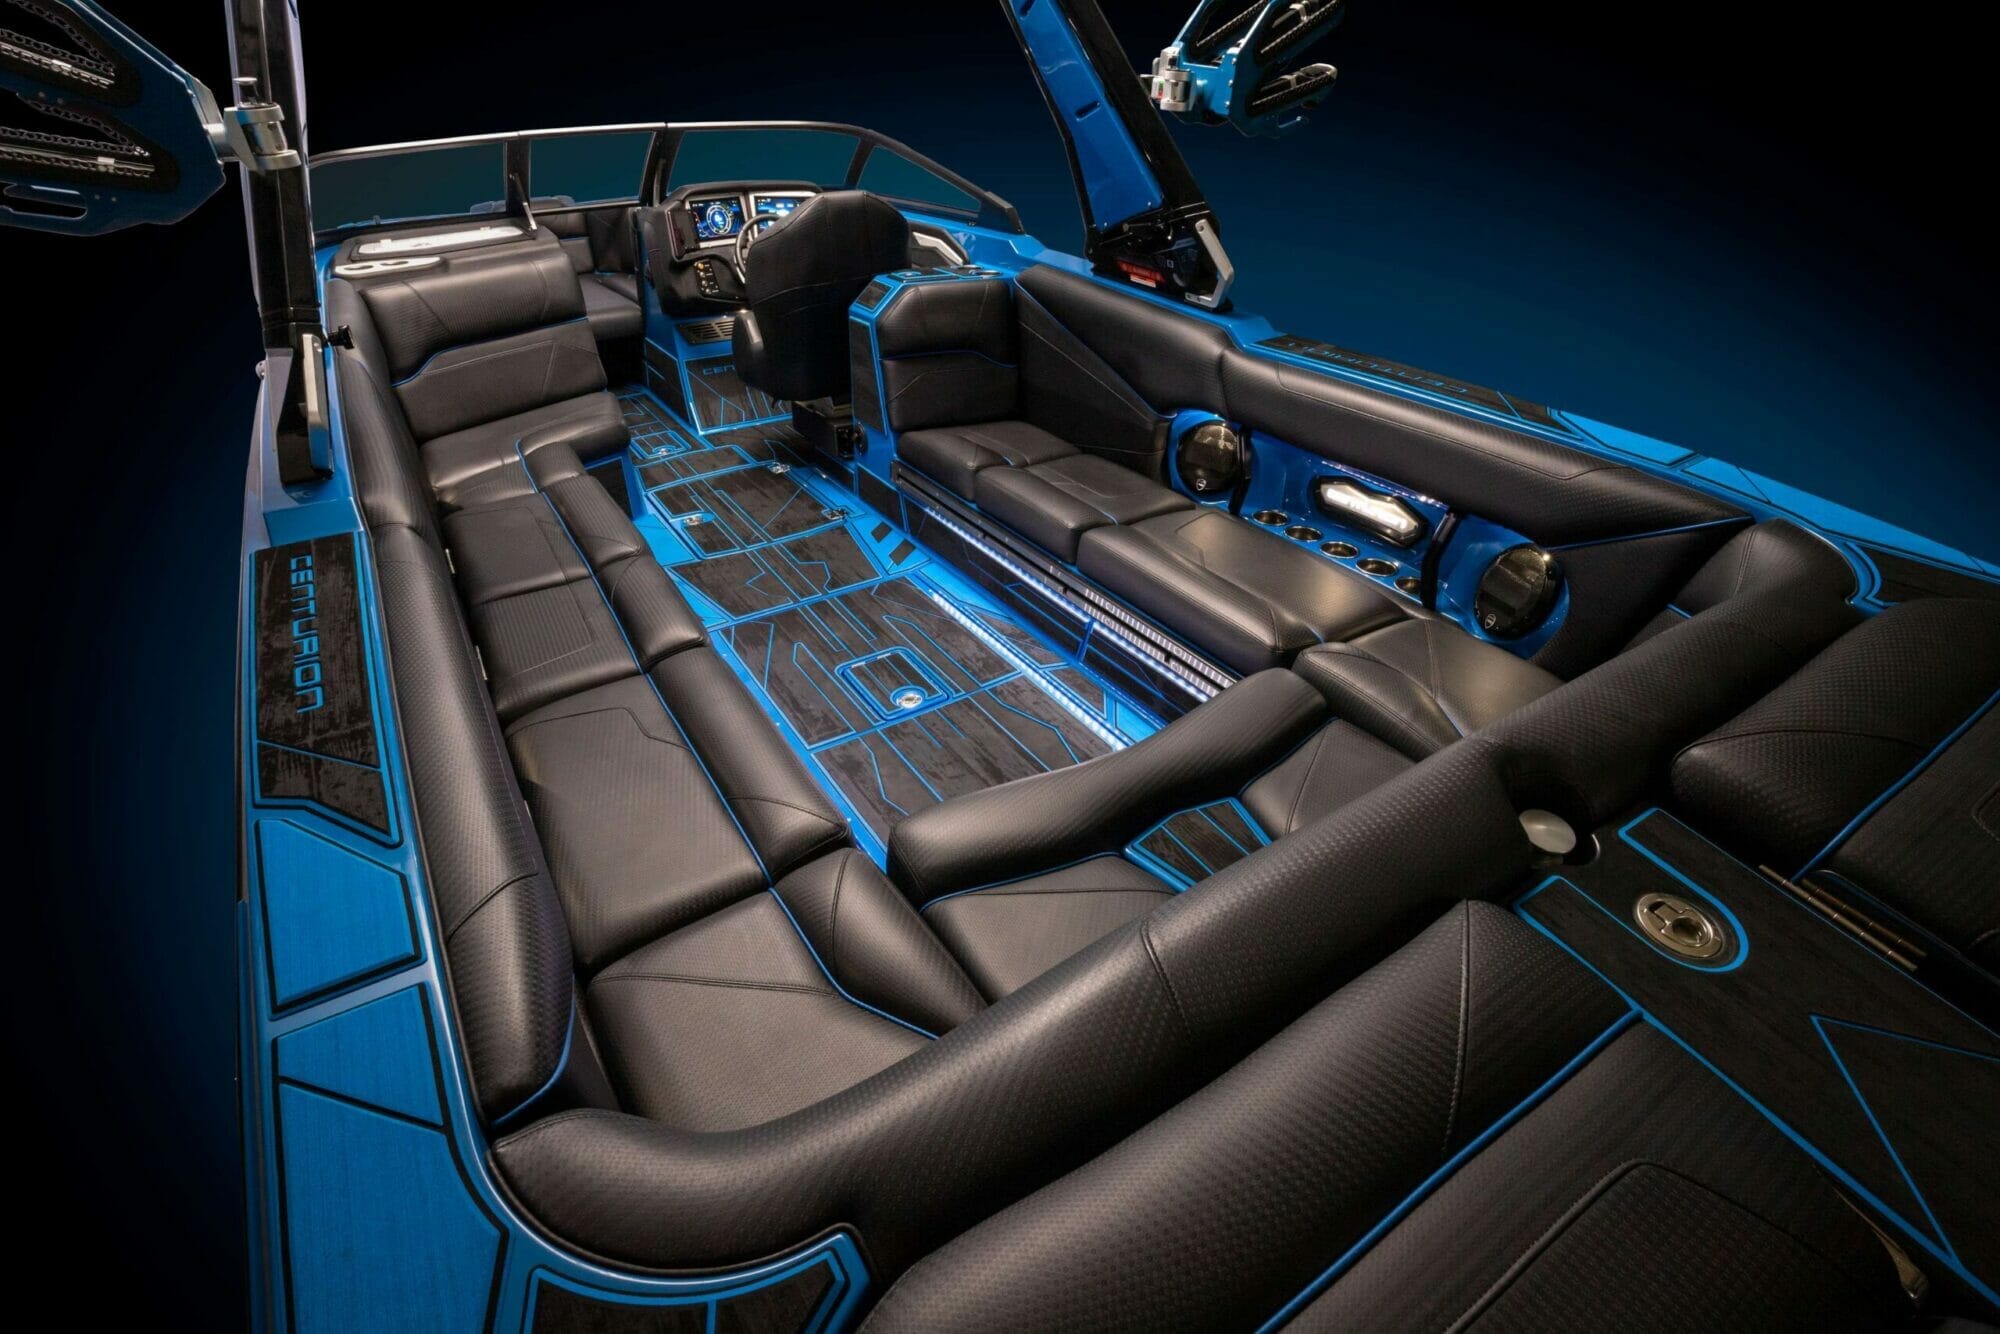 The interior of a blue and black wakesurf boat.